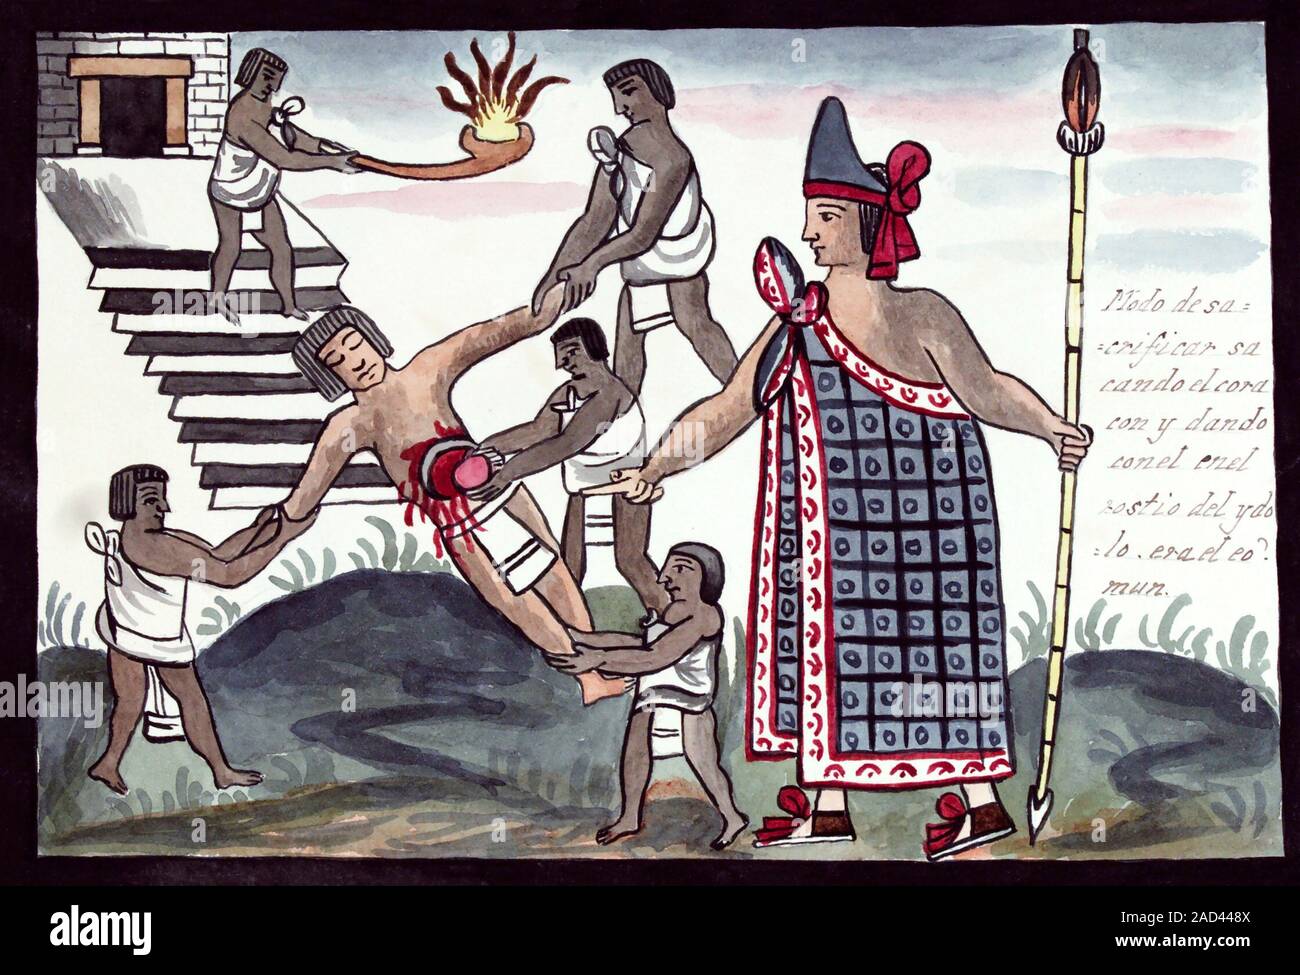 Aztec human sacrifice, 16th century. Illustration of a priest holding a spear while presiding over the sacrifice of a flower war captive whose heart i Stock Photo